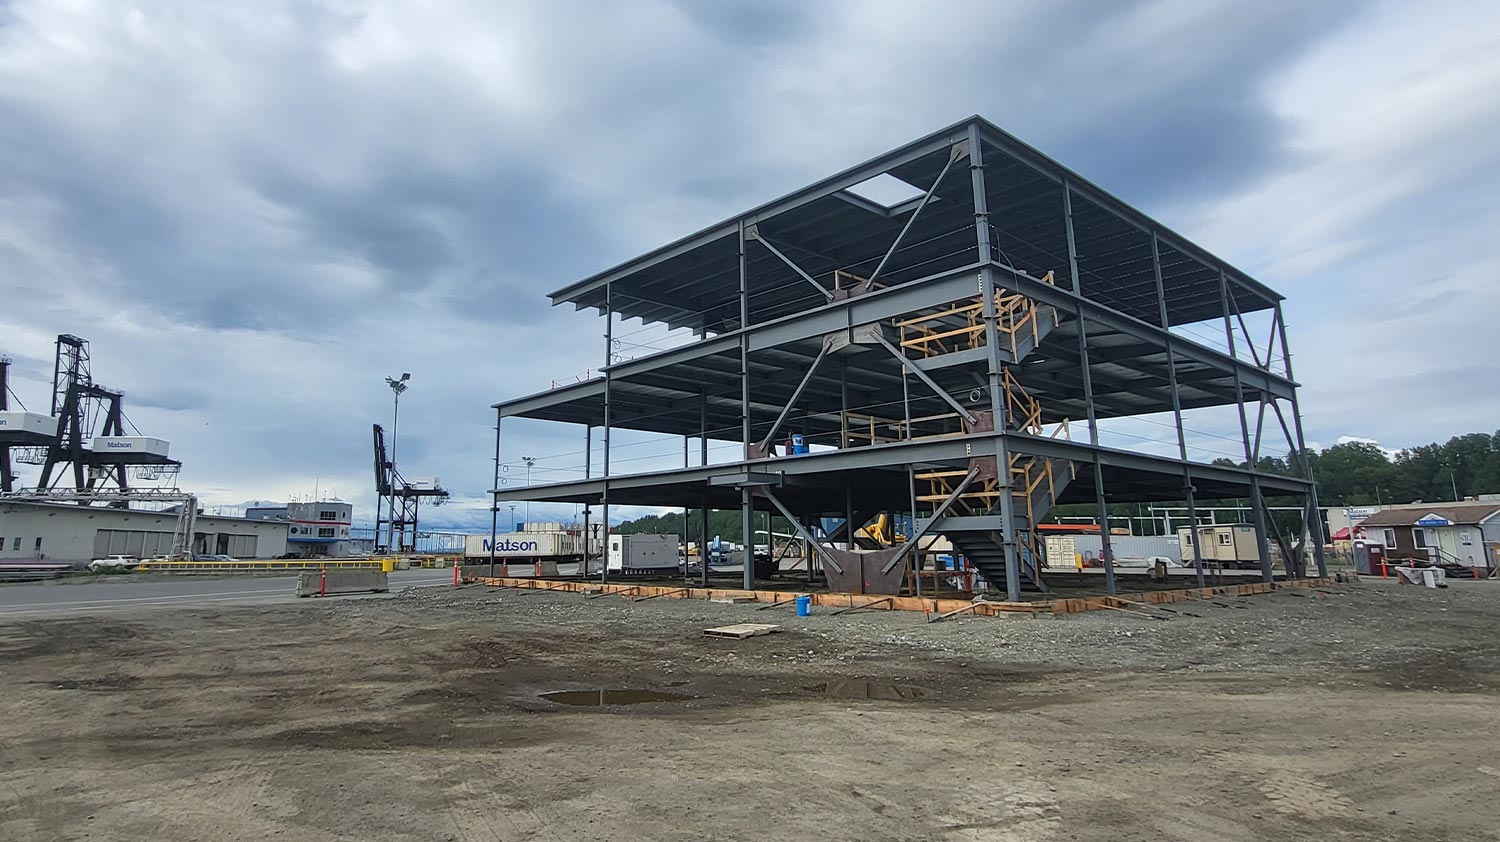 view of the structural steel frame of the the three-story, 16,919-square-foot Port of Alaska administration building